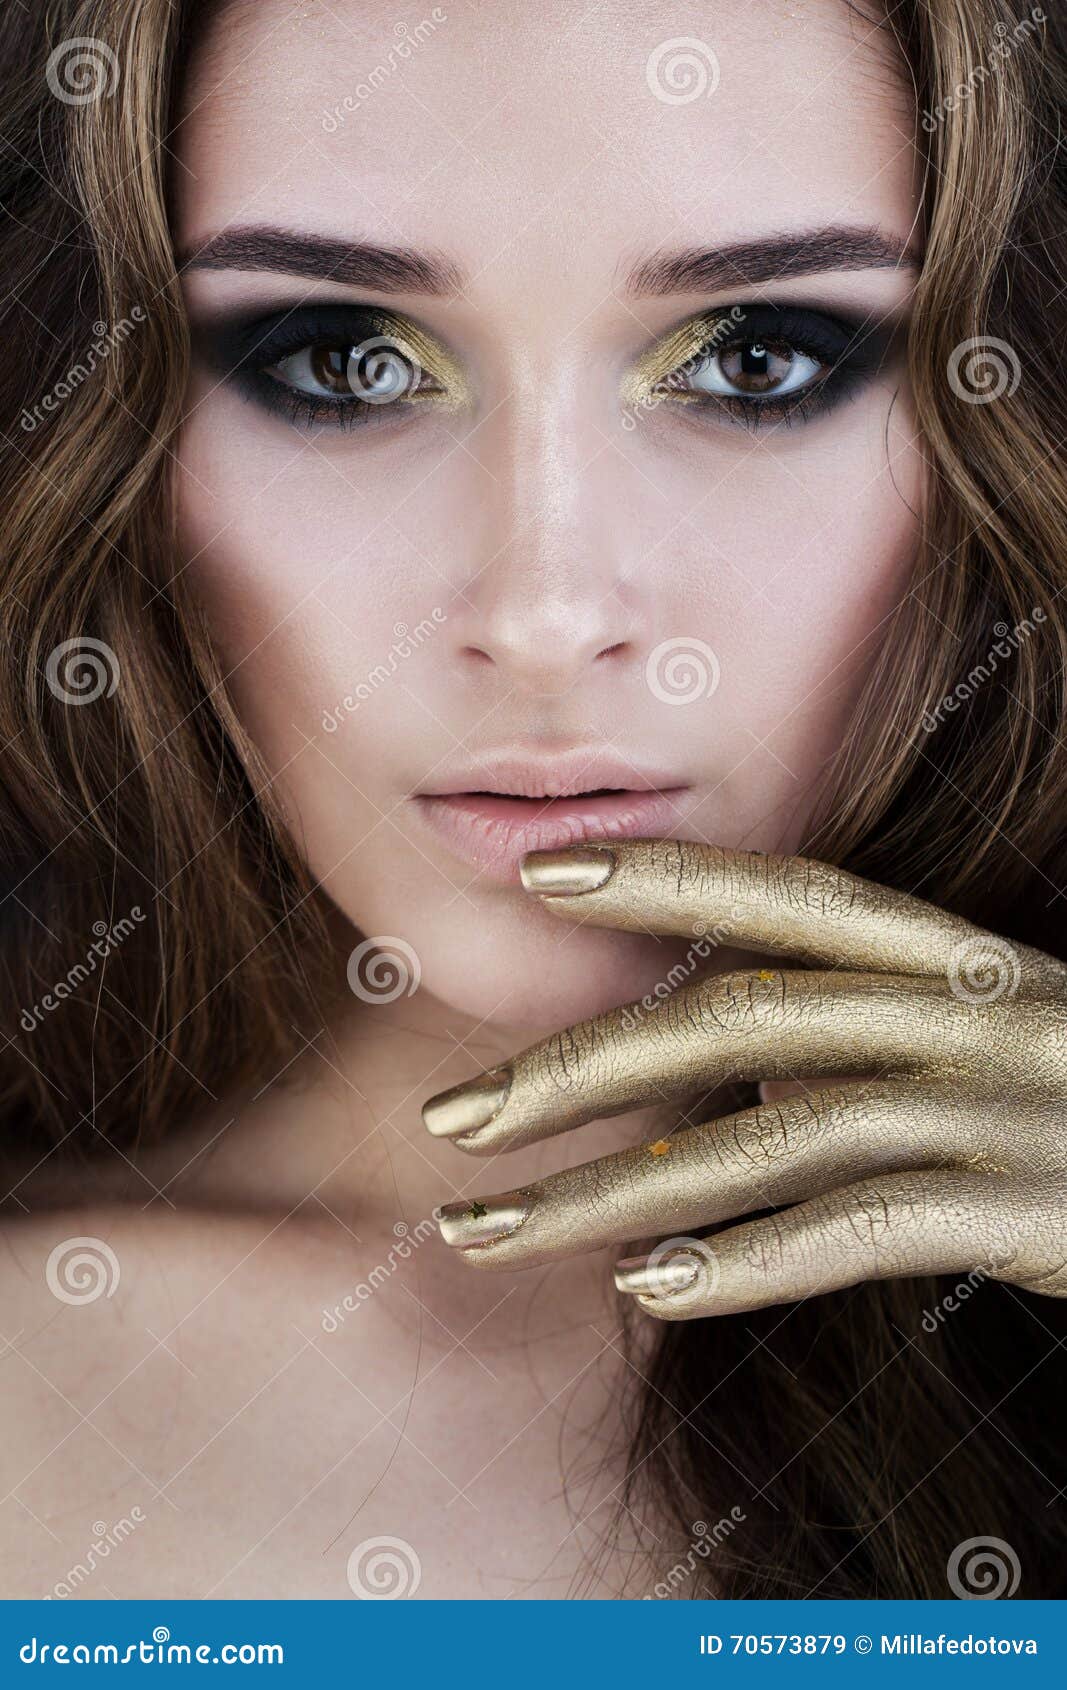 Female Face. Glamorous Woman with Makeup Stock Image - Image of event ...